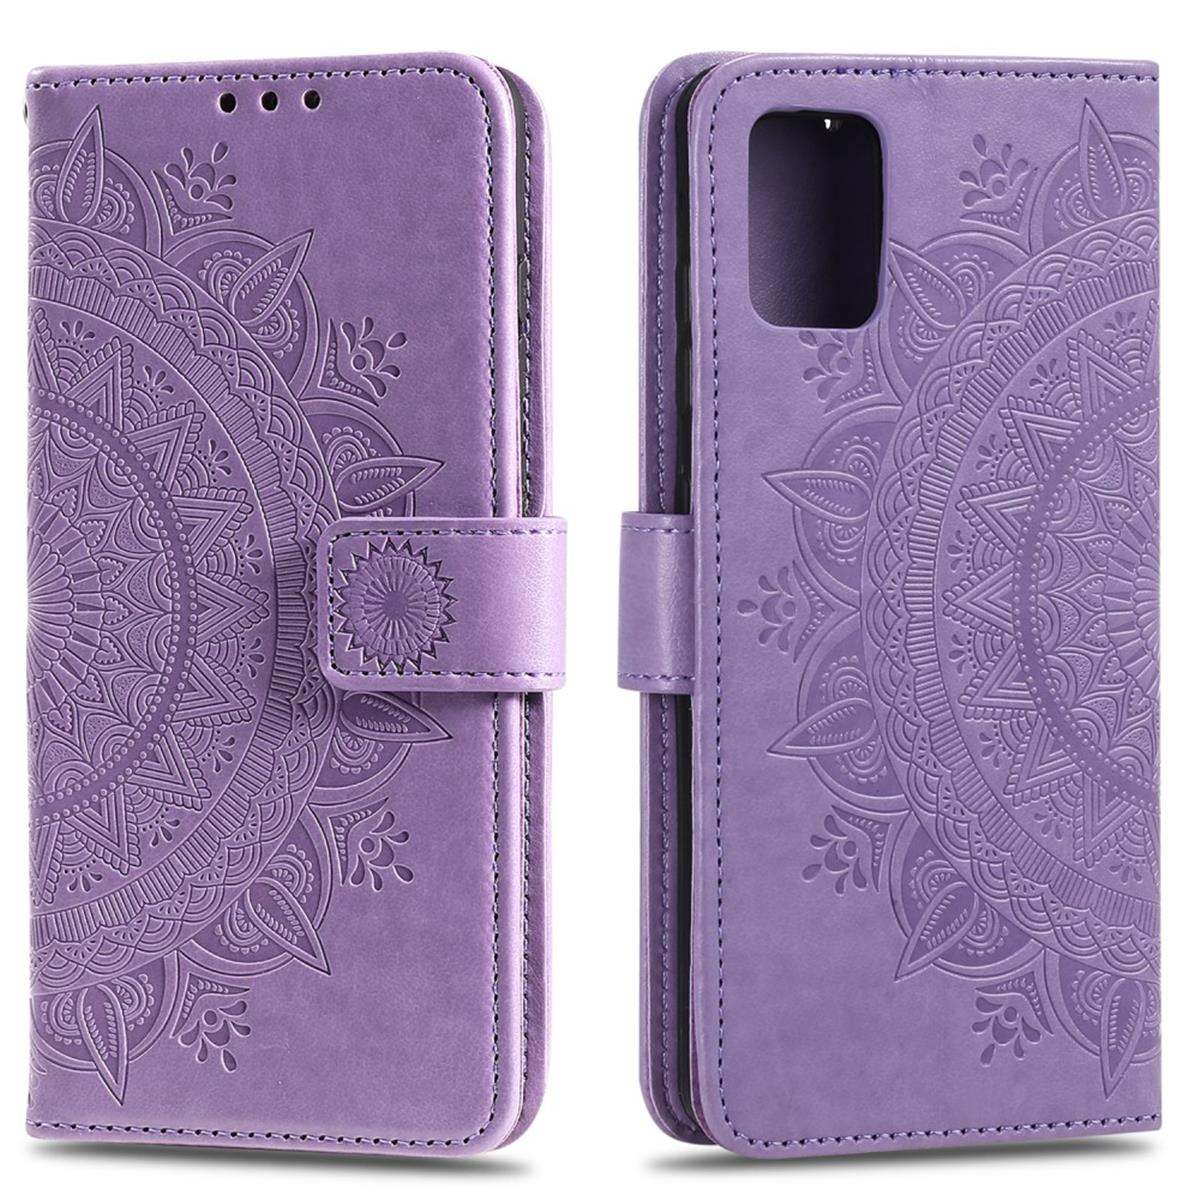 COVERKINGZ Klapphülle mit Mandala Muster, Bookcover, Galaxy Samsung, A51, Lila